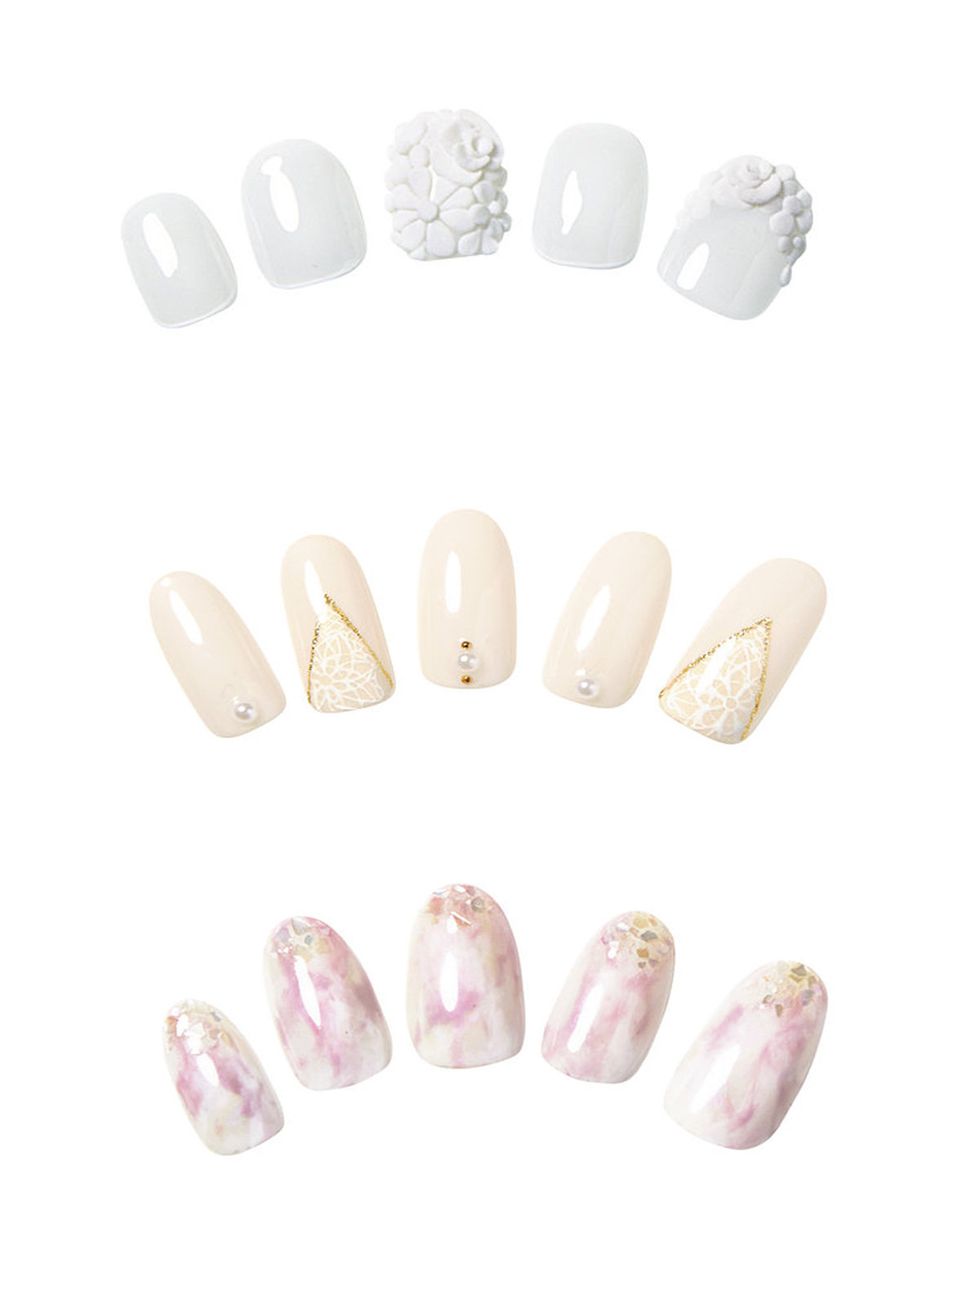 Nail, Nail care, Nail polish, Finger, Manicure, Artificial nails, Material property, Cosmetics, Beige, 